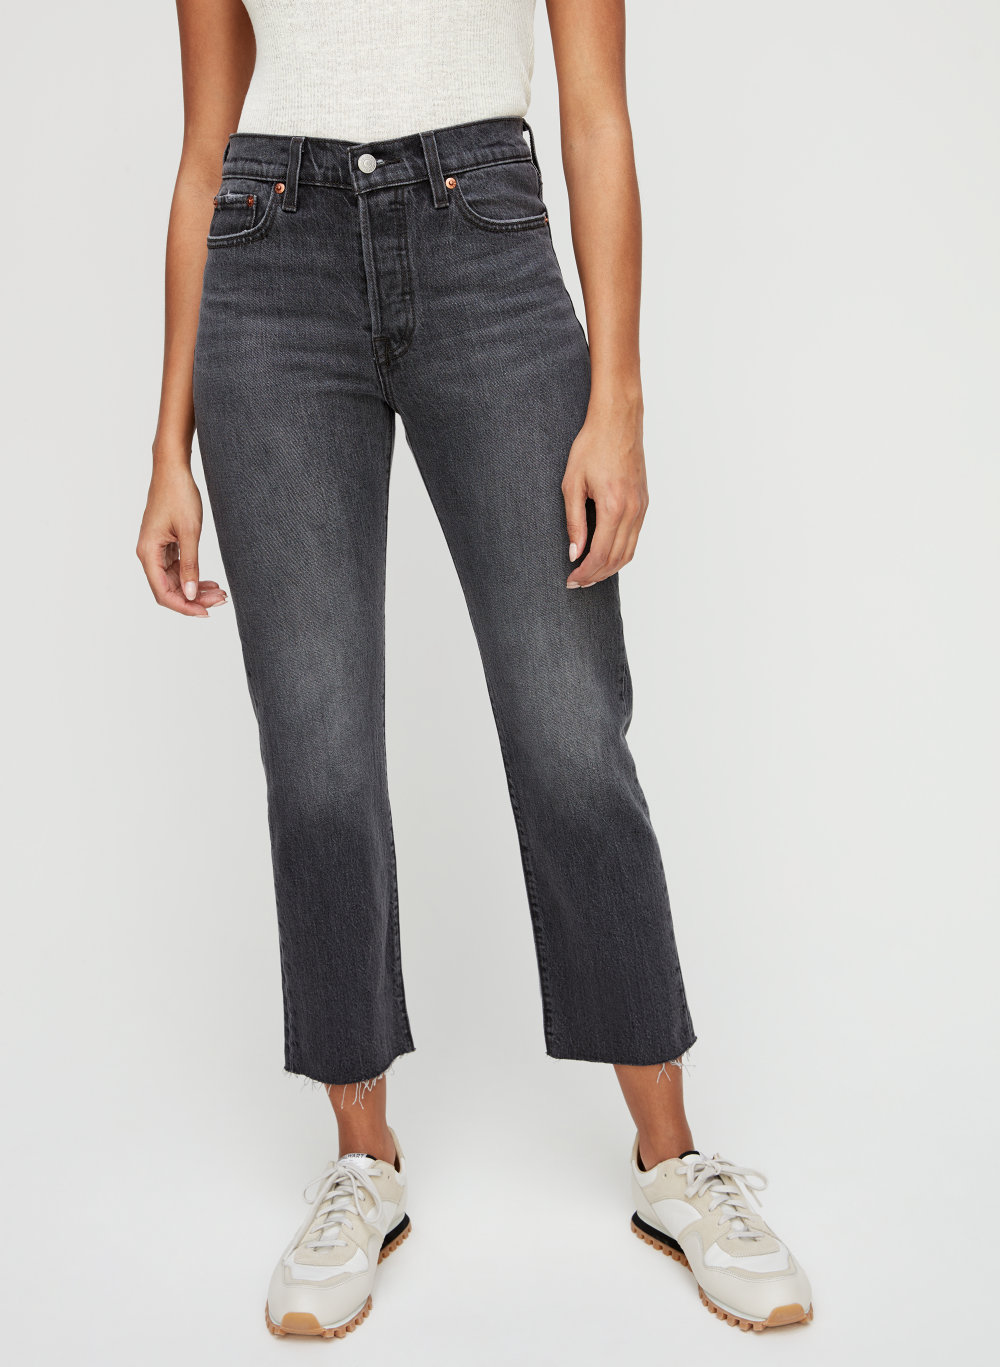 levi's black wedgie straight jeans